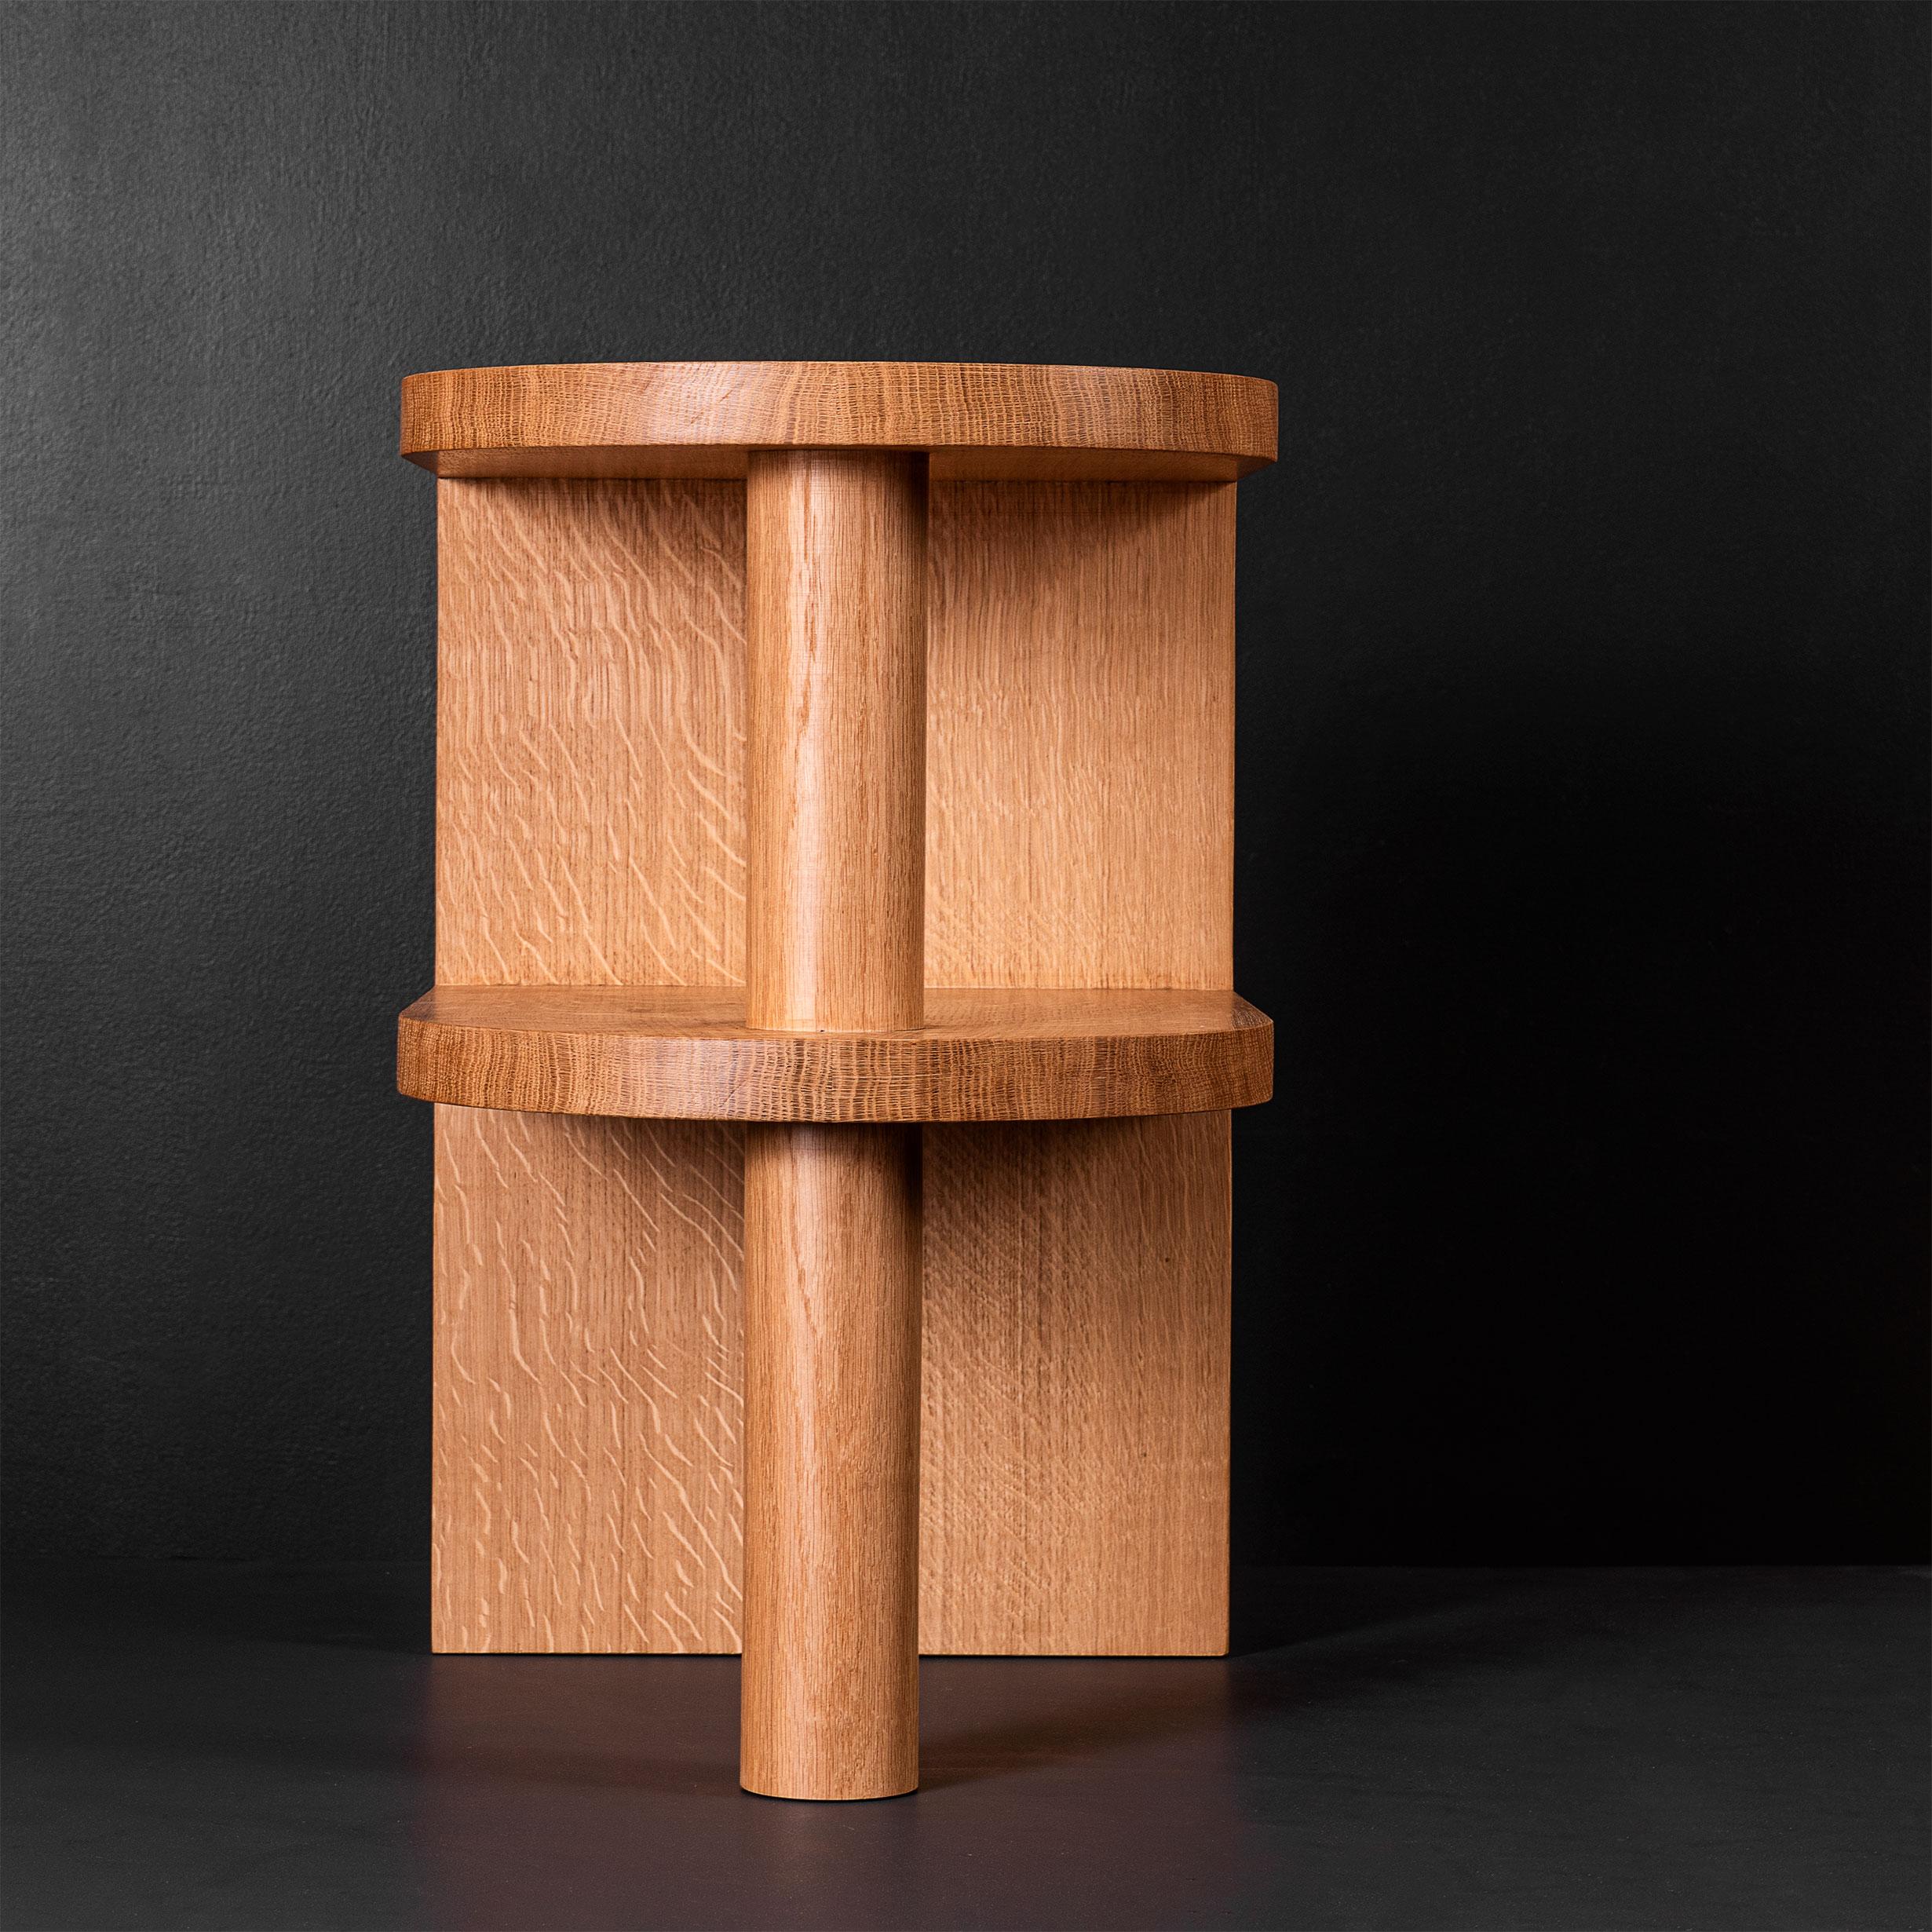 Hand-Crafted Handcrafted English Oak Night Stands